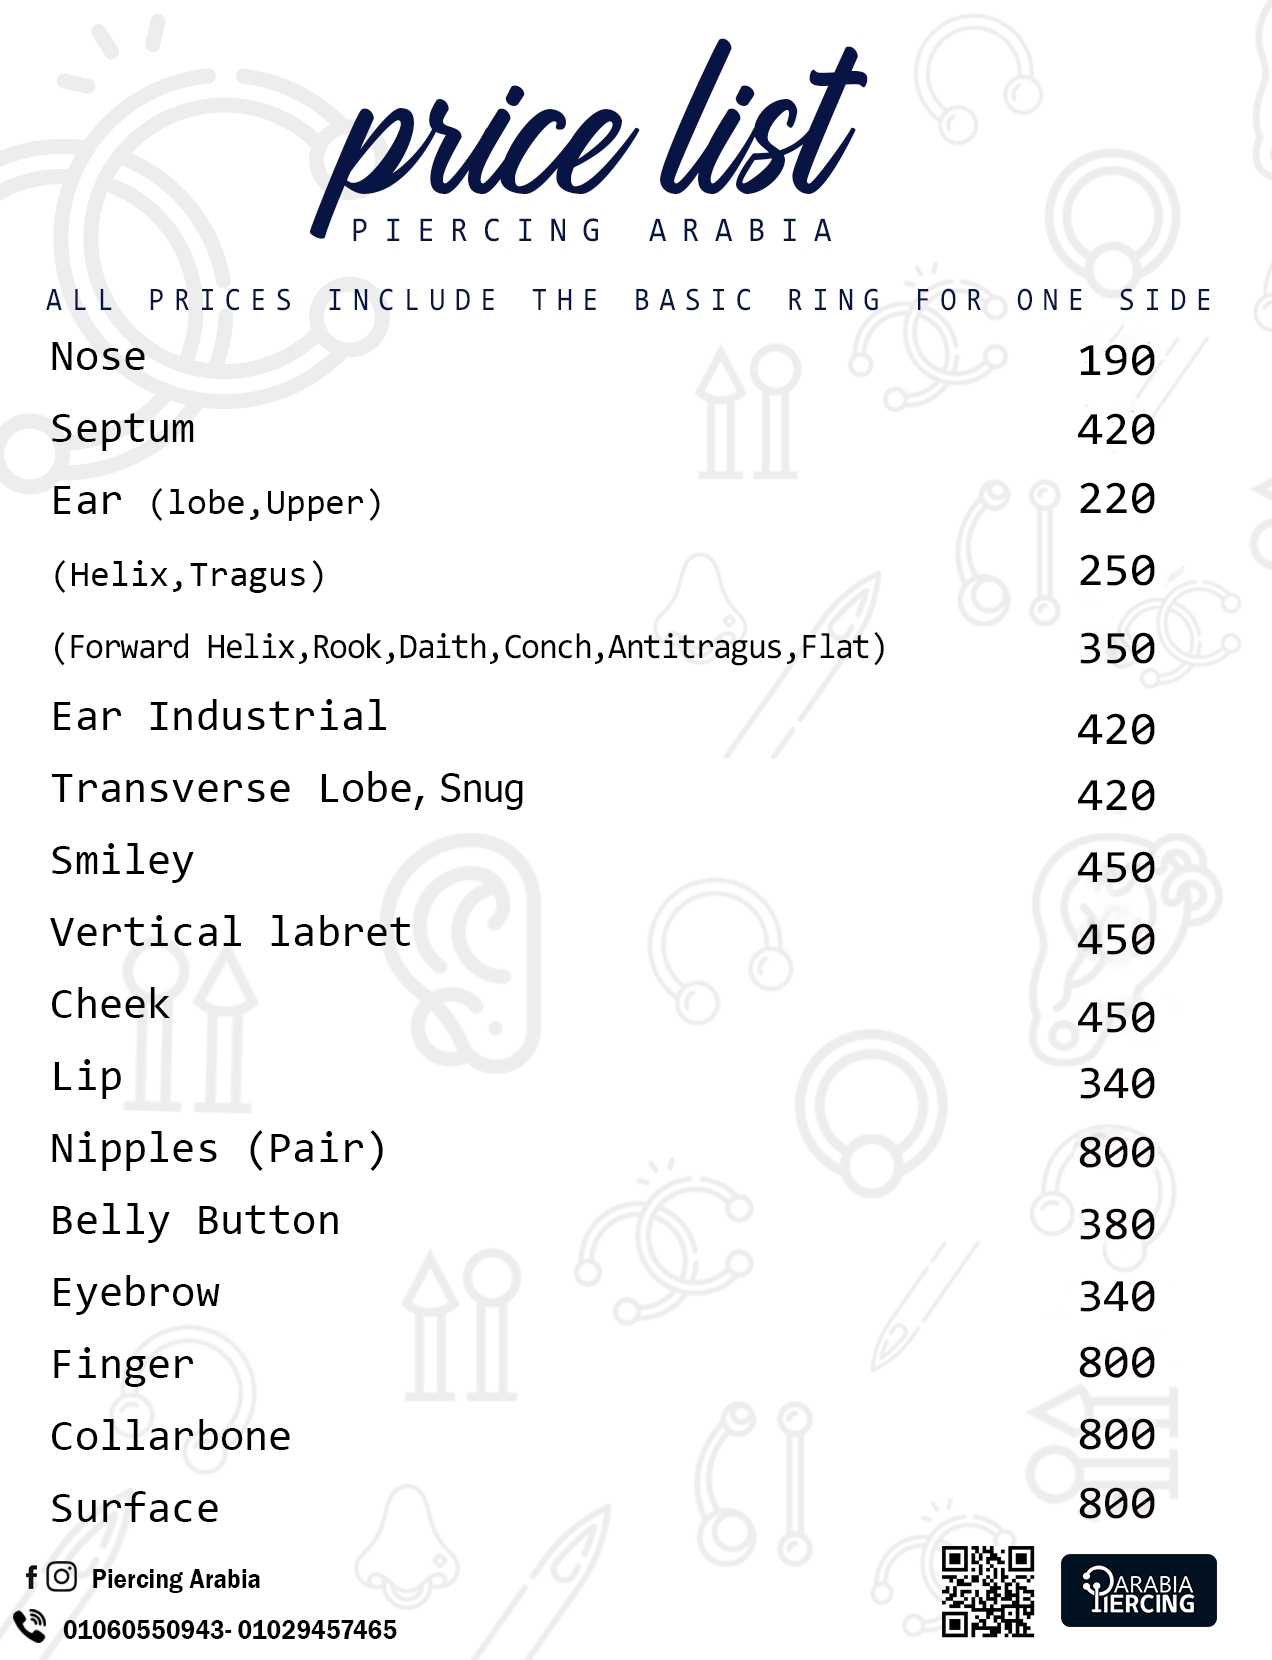 <h3><strong>PRICE LIST</strong></h3>